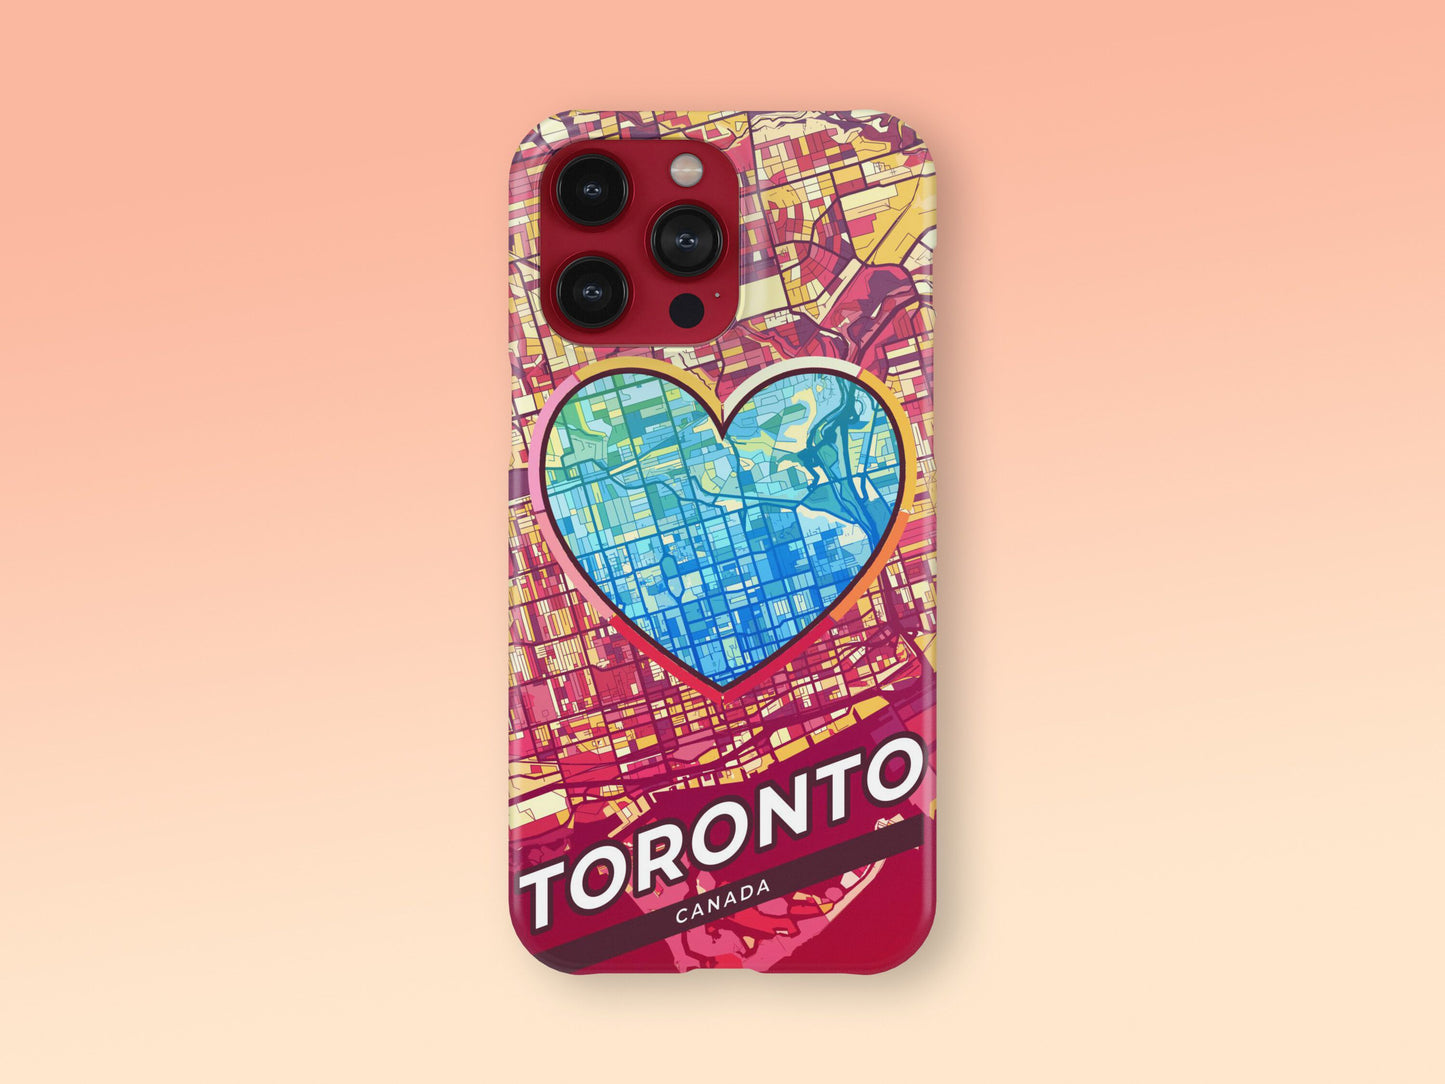 Toronto Canada slim phone case with colorful icon 2